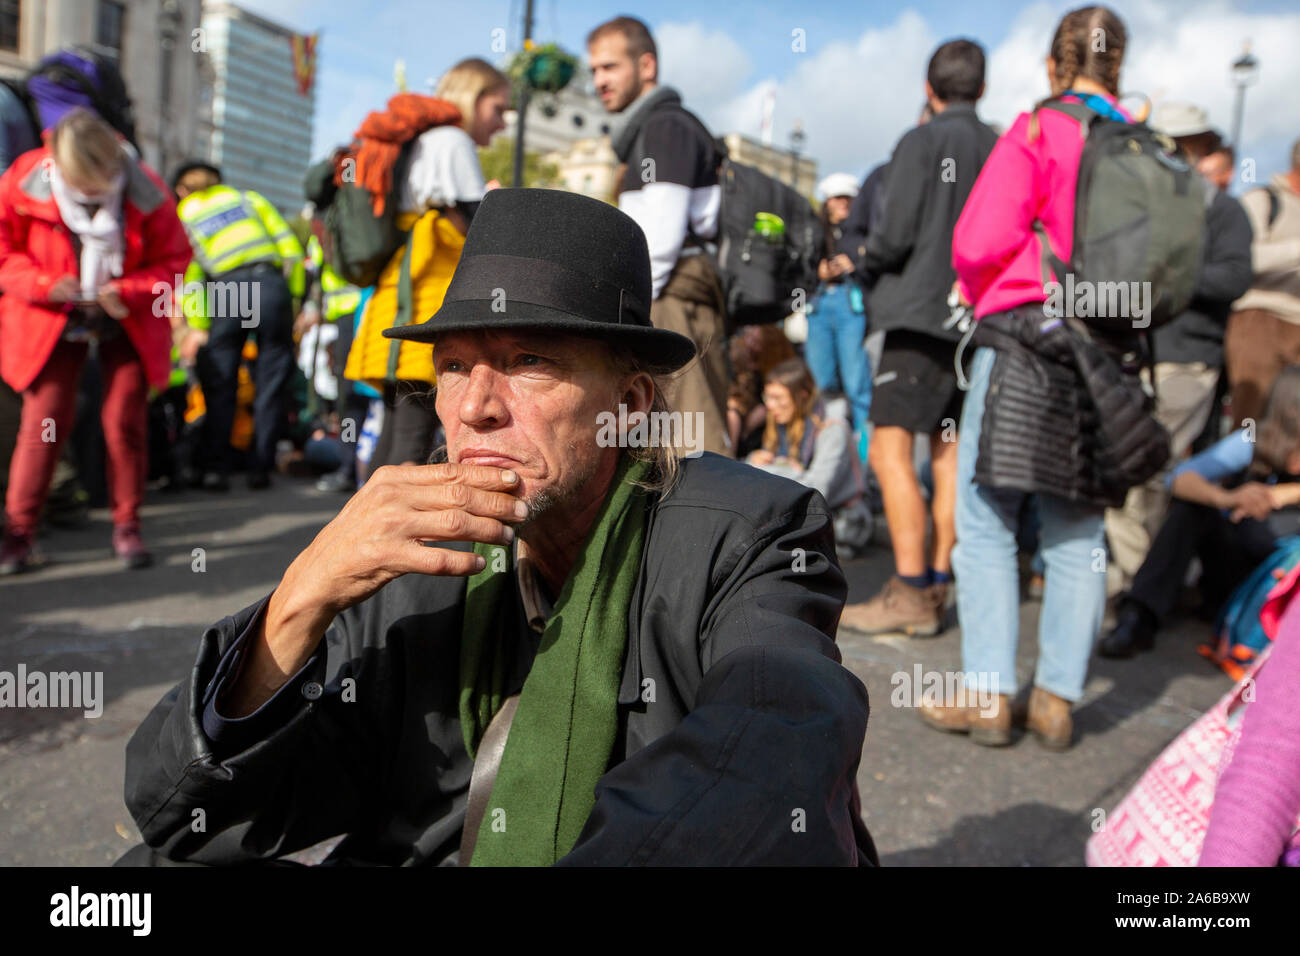 London, 10th October 2019, Extinction Rebellion demonstration and occupation of the roads around Trafalgar Square. Stock Photo